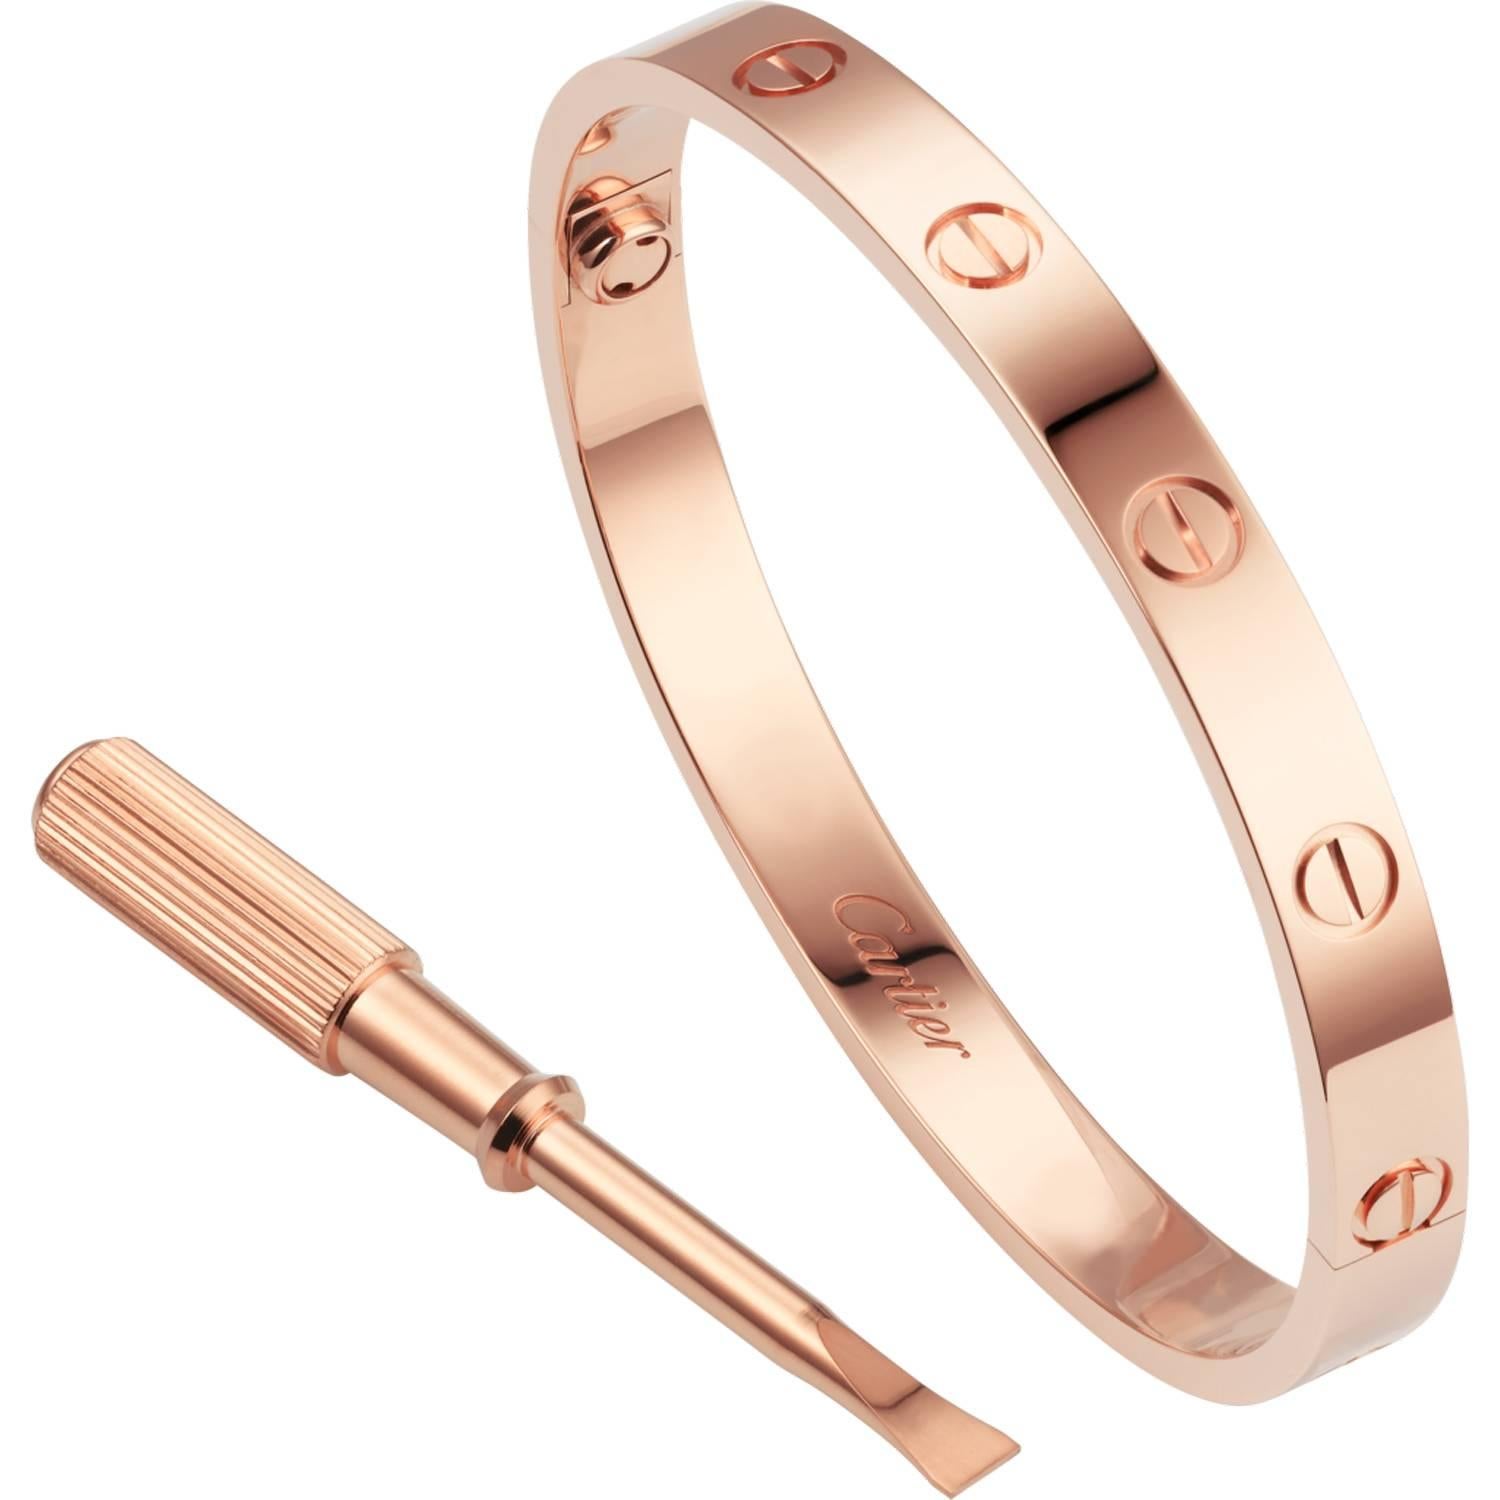 Beautiful 18k rose gold authentic Cartier love bangle, size 17, in like new condition. This bangle has the new screw system and accompanied with the original box and authentication paperwork. The Cartier love collection has created a timeless